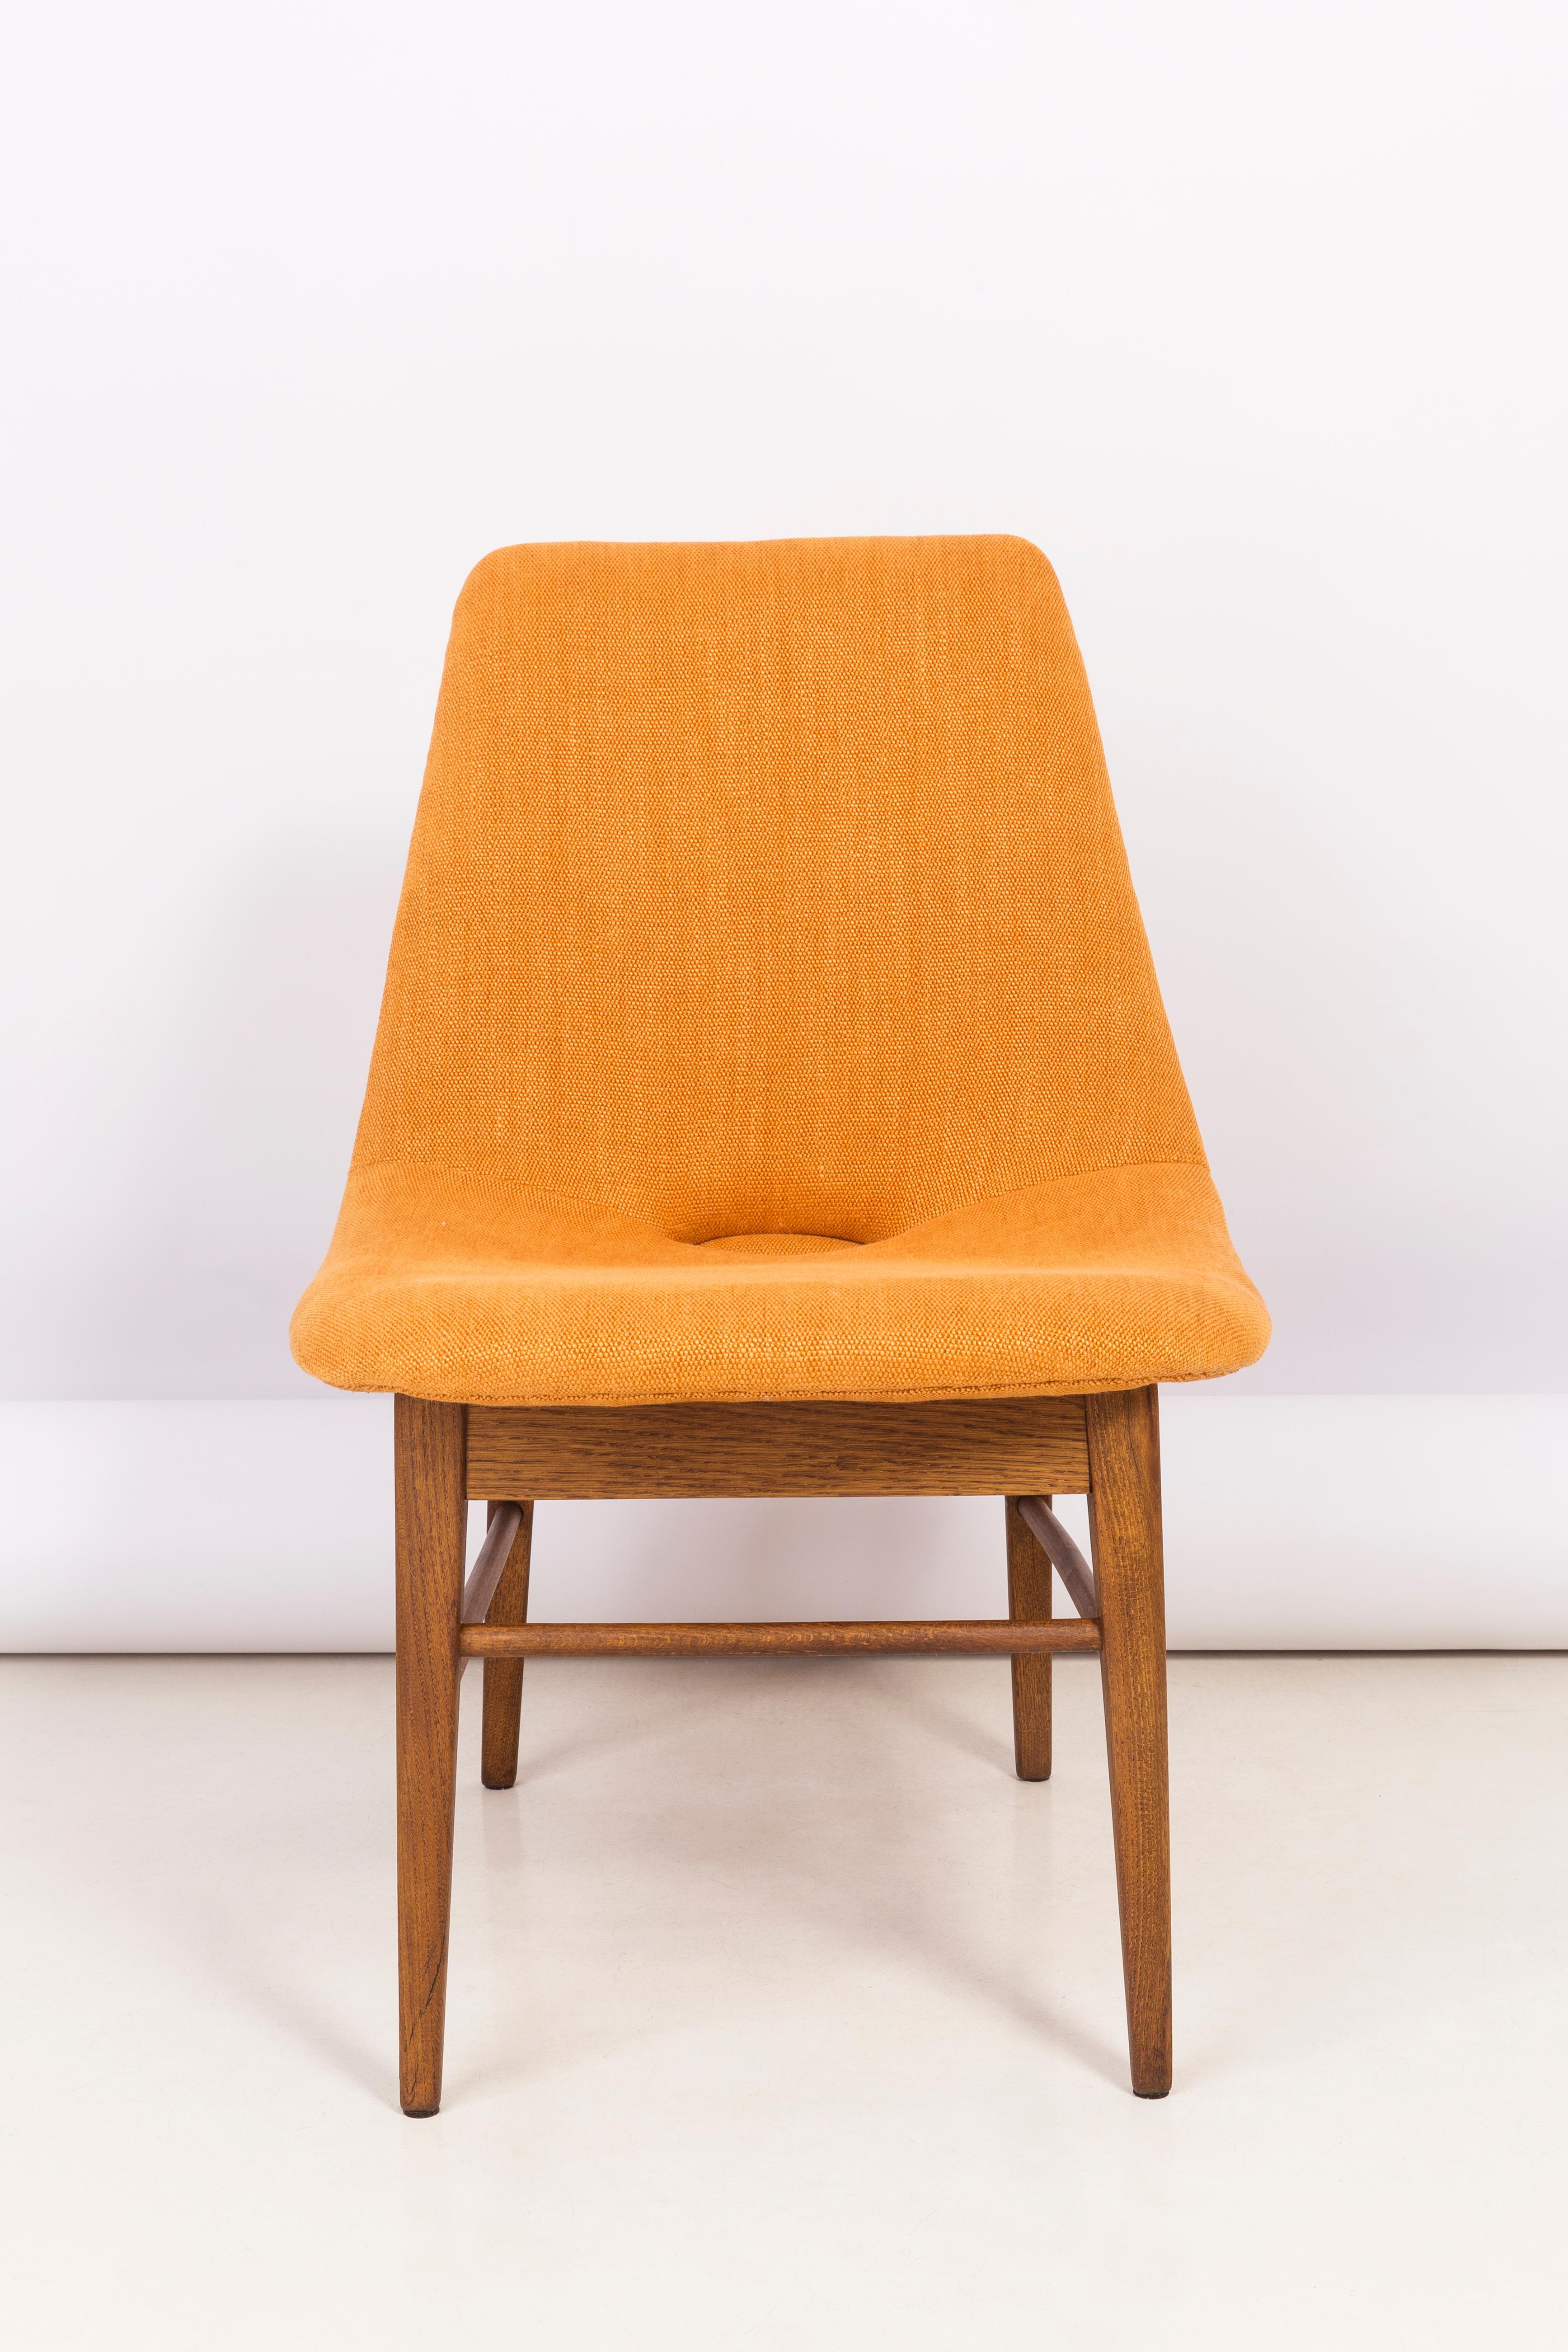 Set of Two Rare 20th Century Orange Shell Chairs, H. Lachert, 1960s For Sale 7